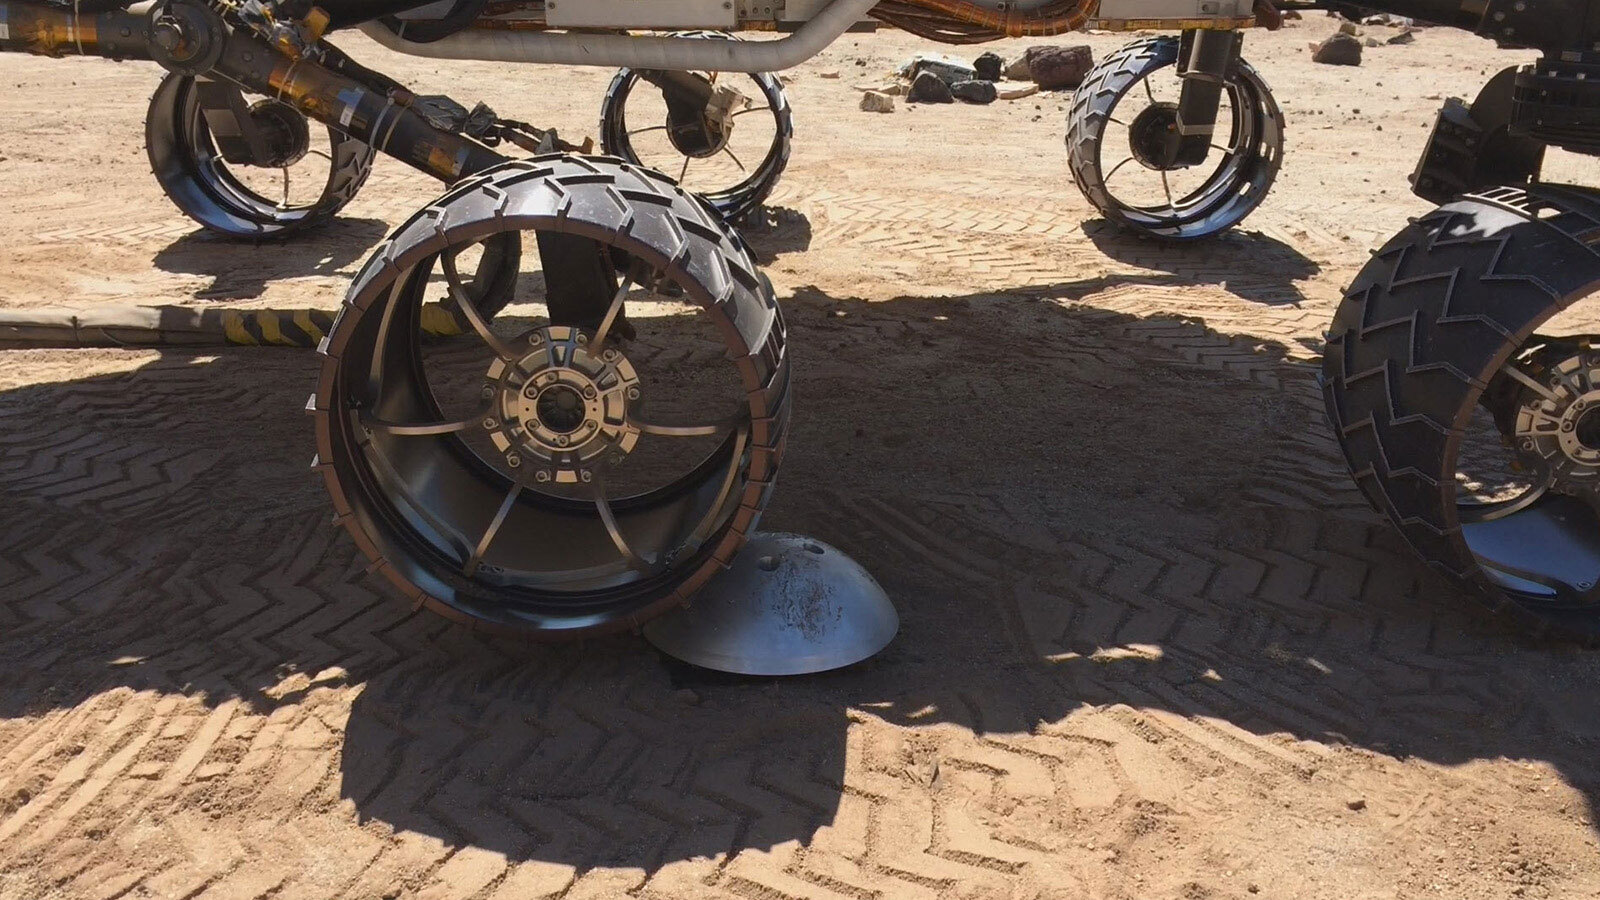 Traction Control Testing: A "scarecrow" rover at NASA's JPL drives over a sensor while testing a new driving algorithm. Engineers created the algorithm to reduce wheel wear on the Mars Curiosity rover. Credits: ASA/JPL-Caltech. Download image ›